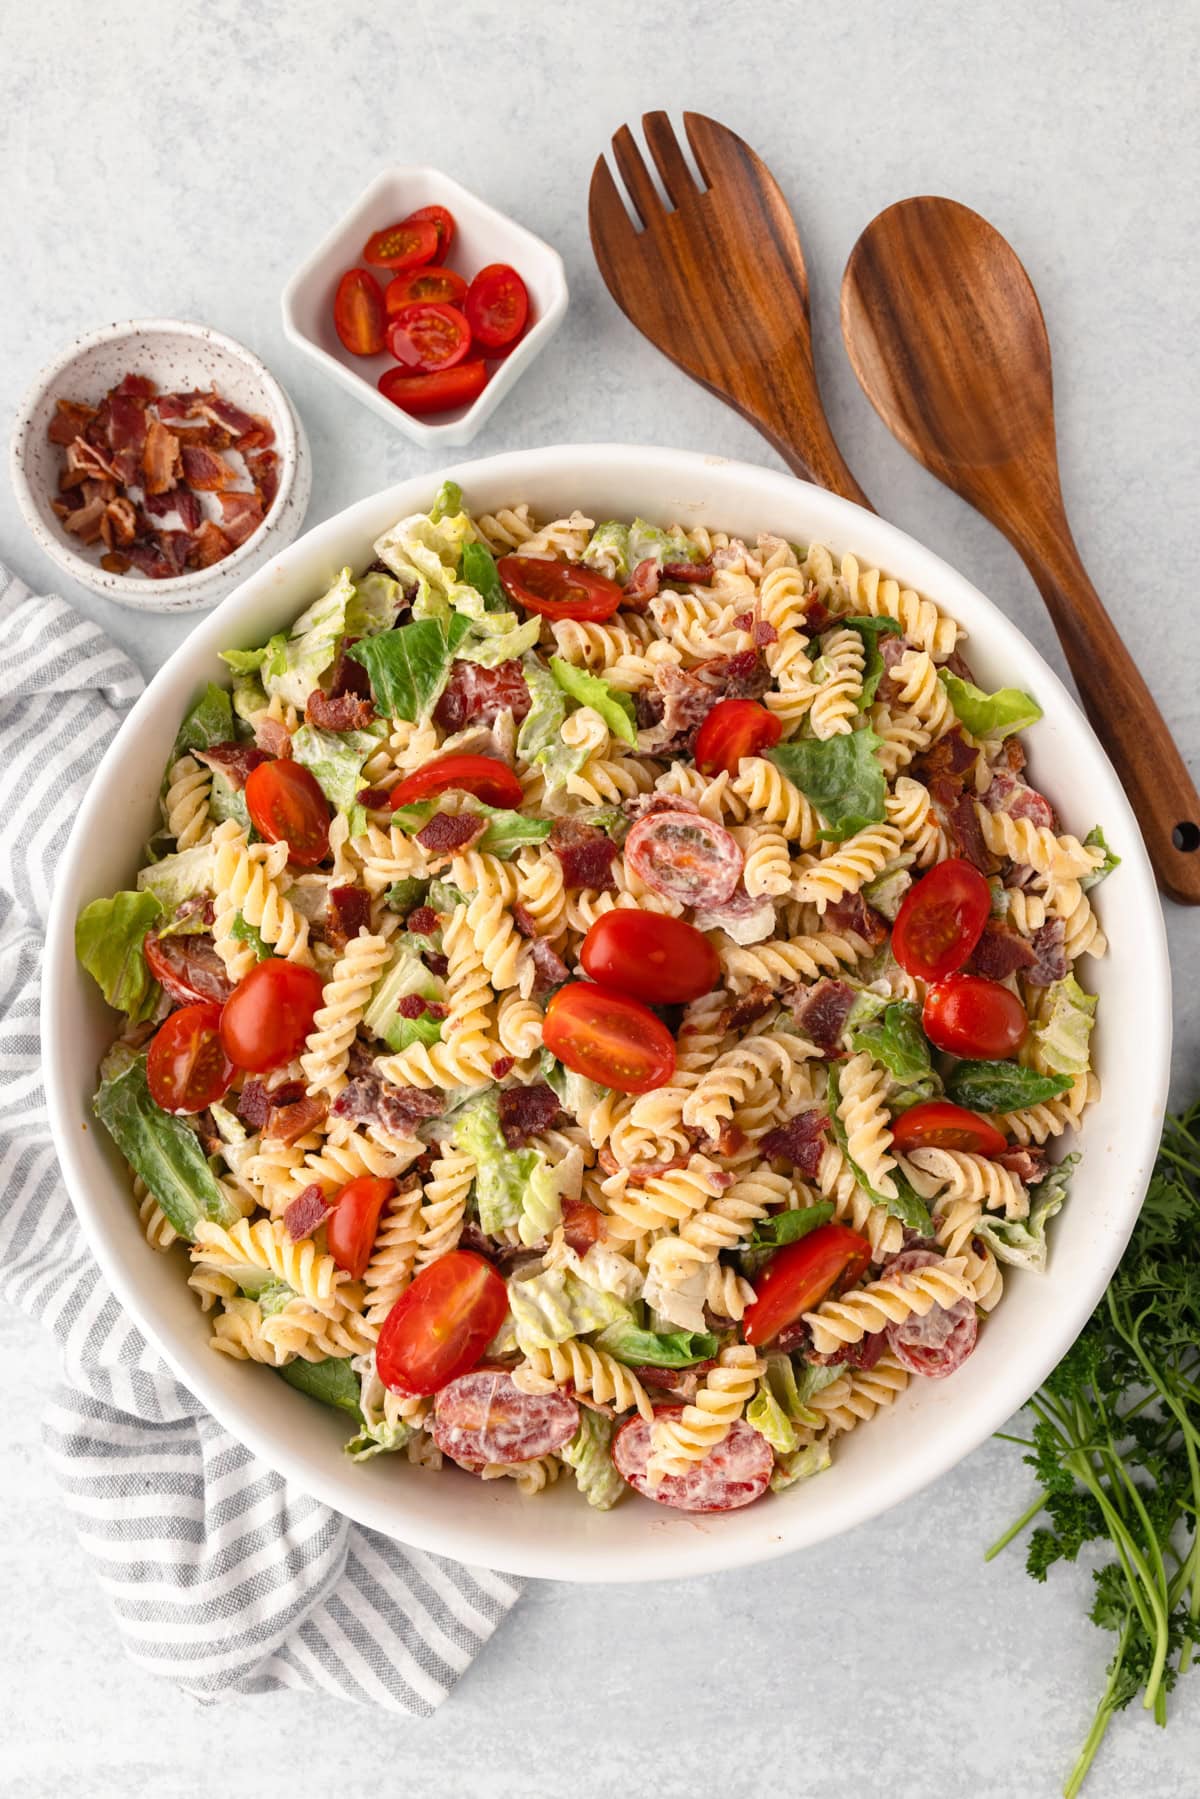 A large white bowl containing a blt pasta salad. It has bacon, romaine lettuce and grape tomatoes.